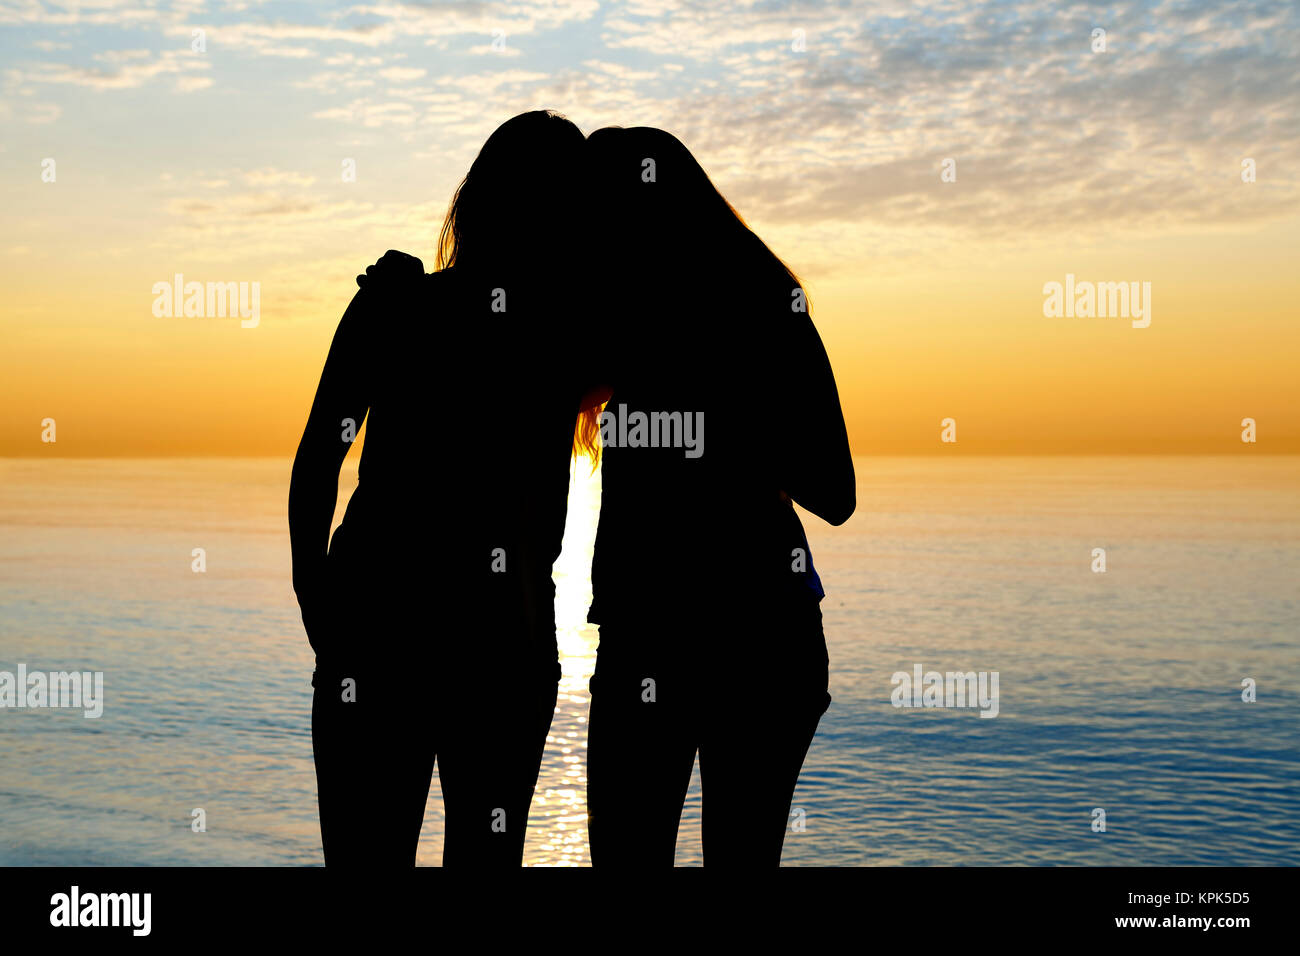 Silhouette of two teenage girls standing in an embrace looking out at a lake at sunset, Woodbine Beach; Toronto, Ontario, Canada Stock Photo